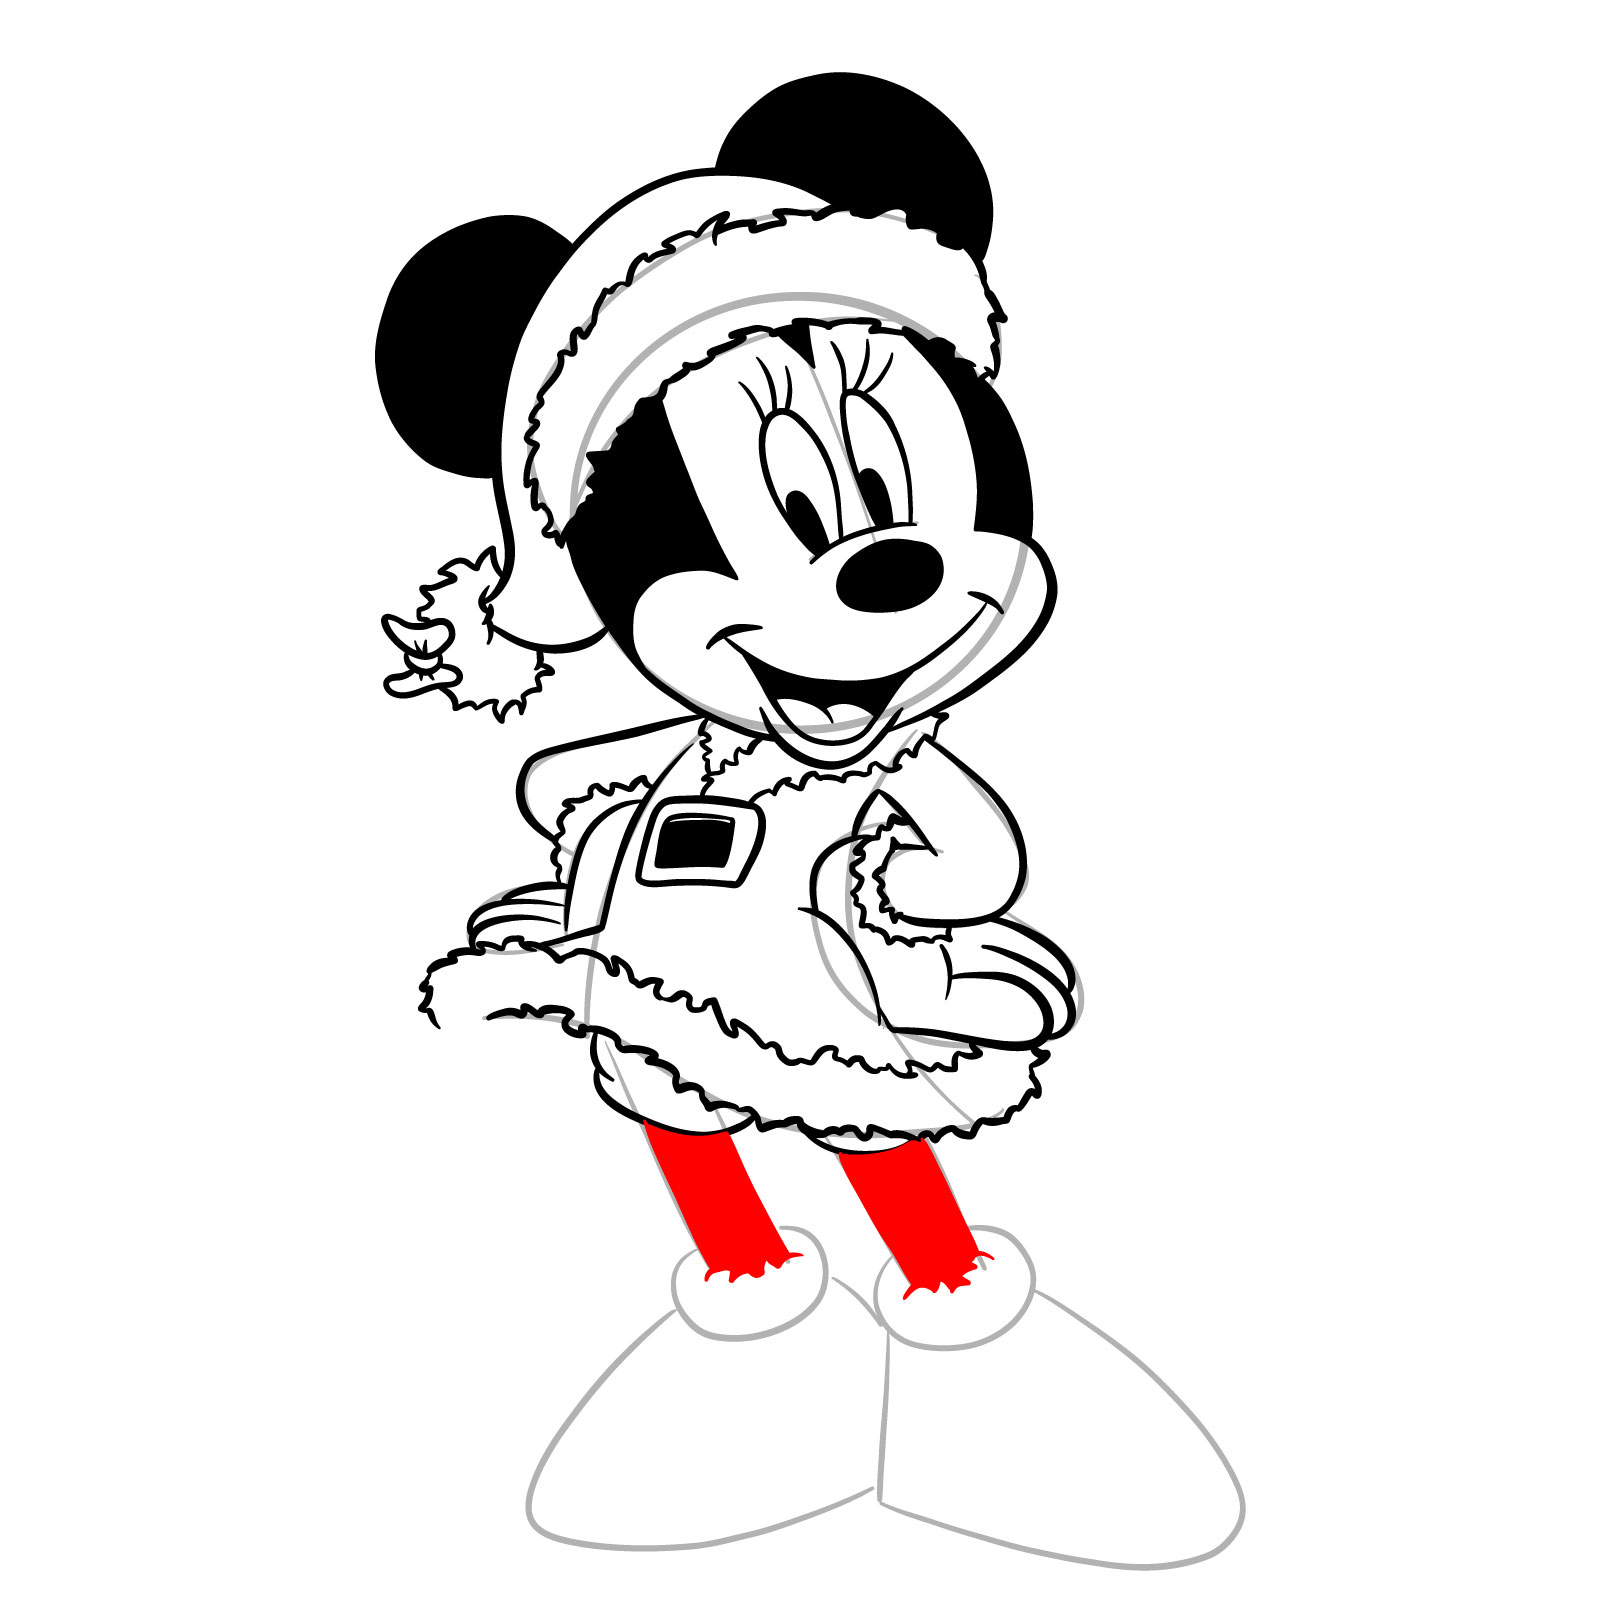 How to draw Minnie in a Christmas dress - step 29